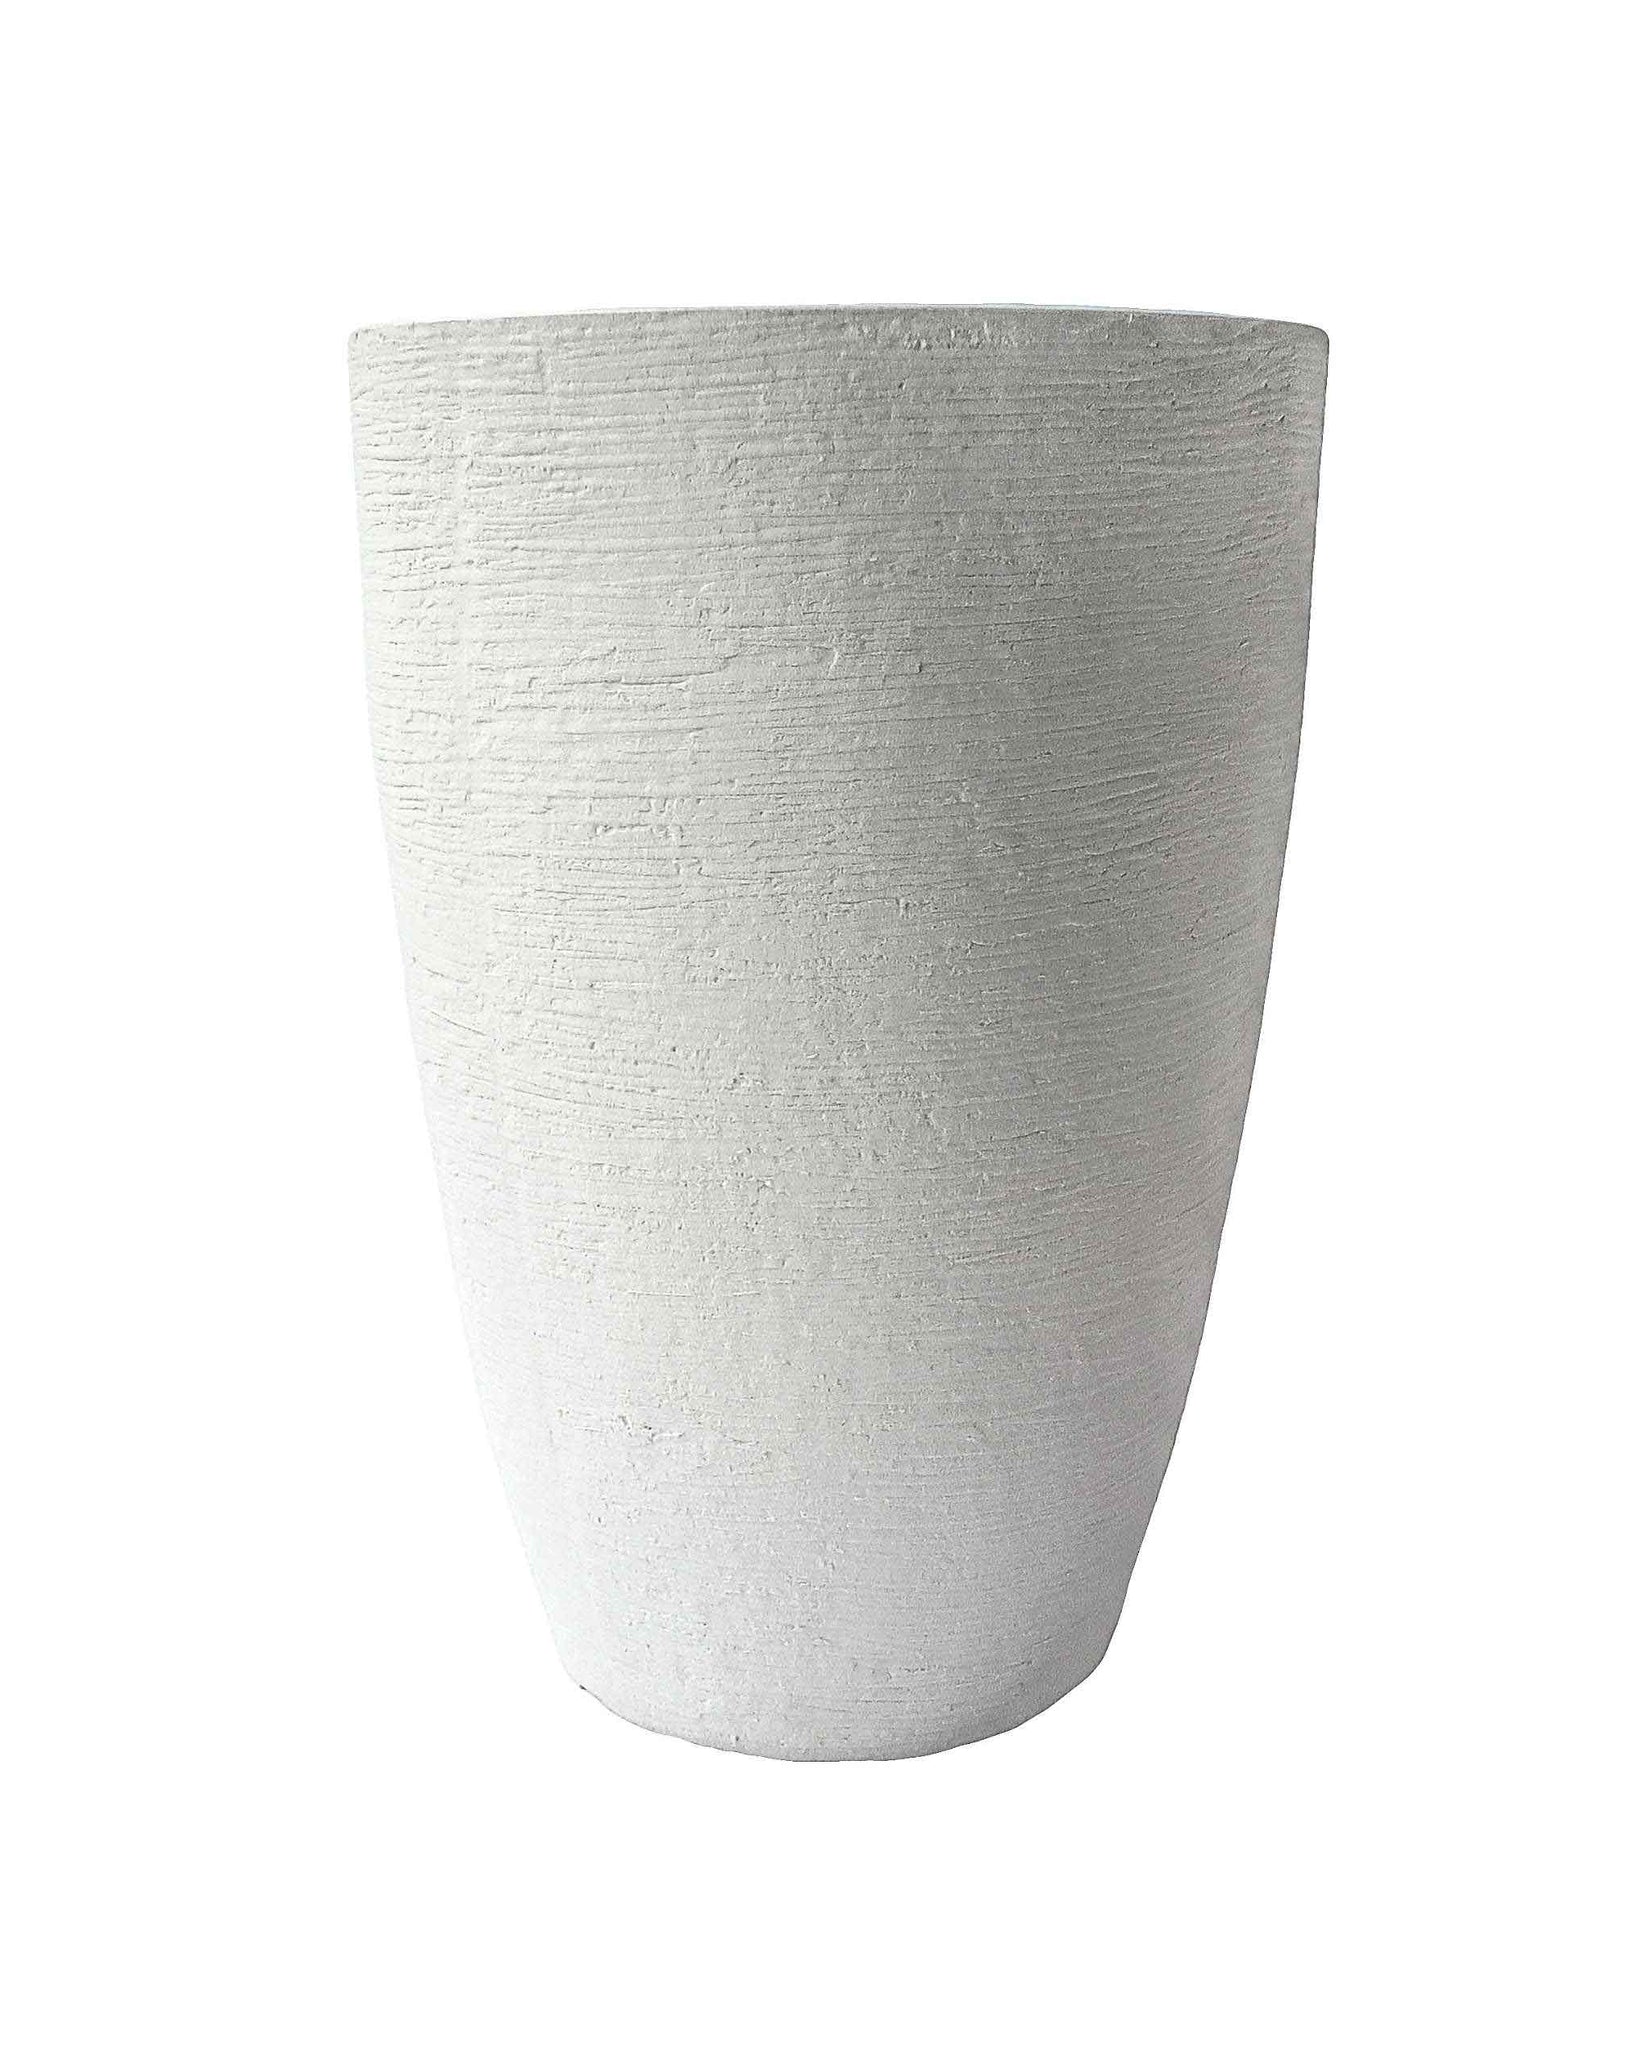 Large upright plant pot. Textured finish. Lightweight poly carbon. Modern and stylish.